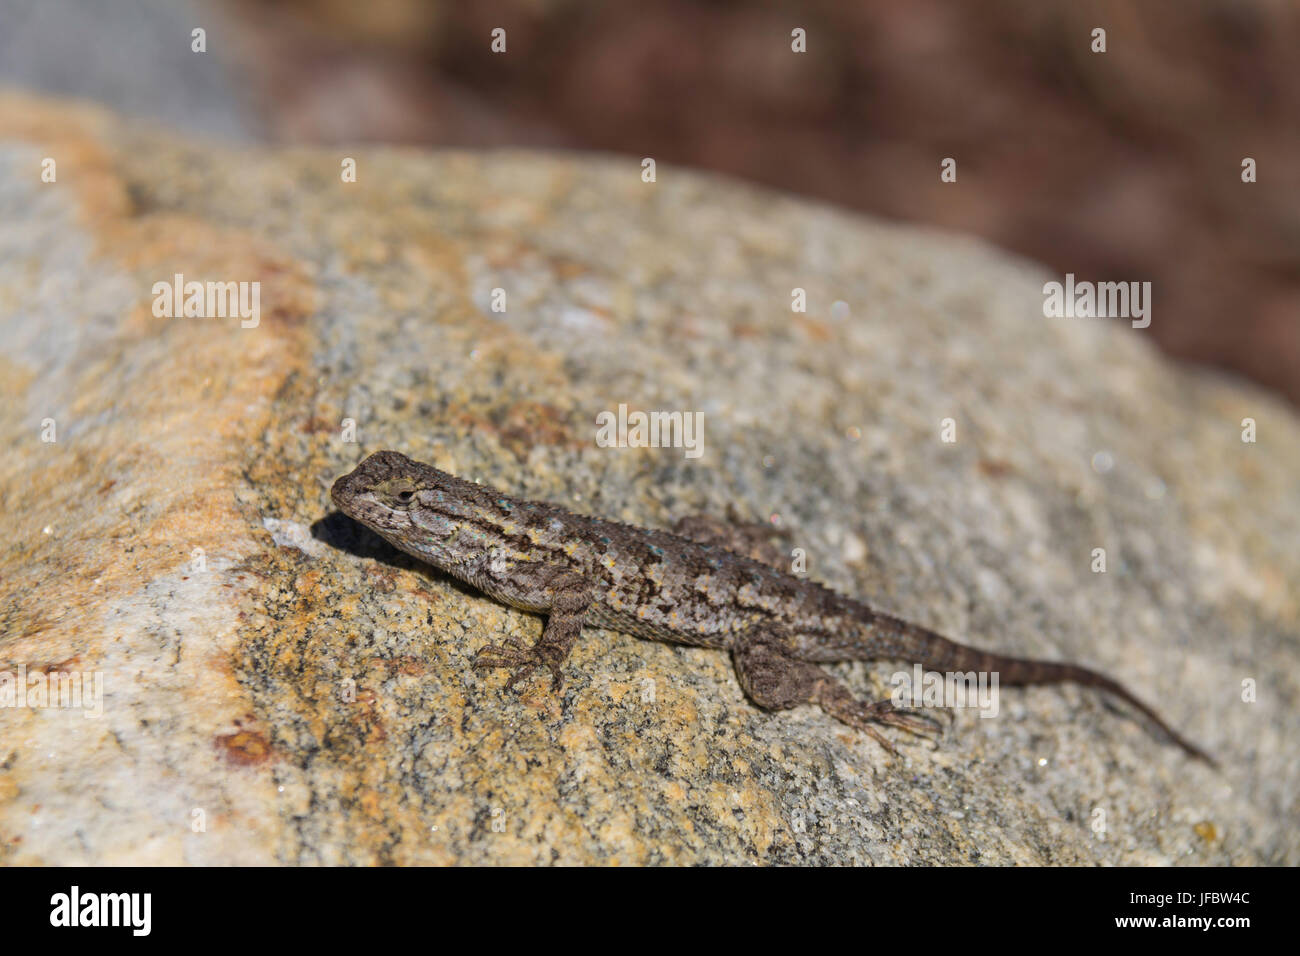 A common sagebrush lizard rests on a rock at Balboa Park in San Diego, California. Stock Photo